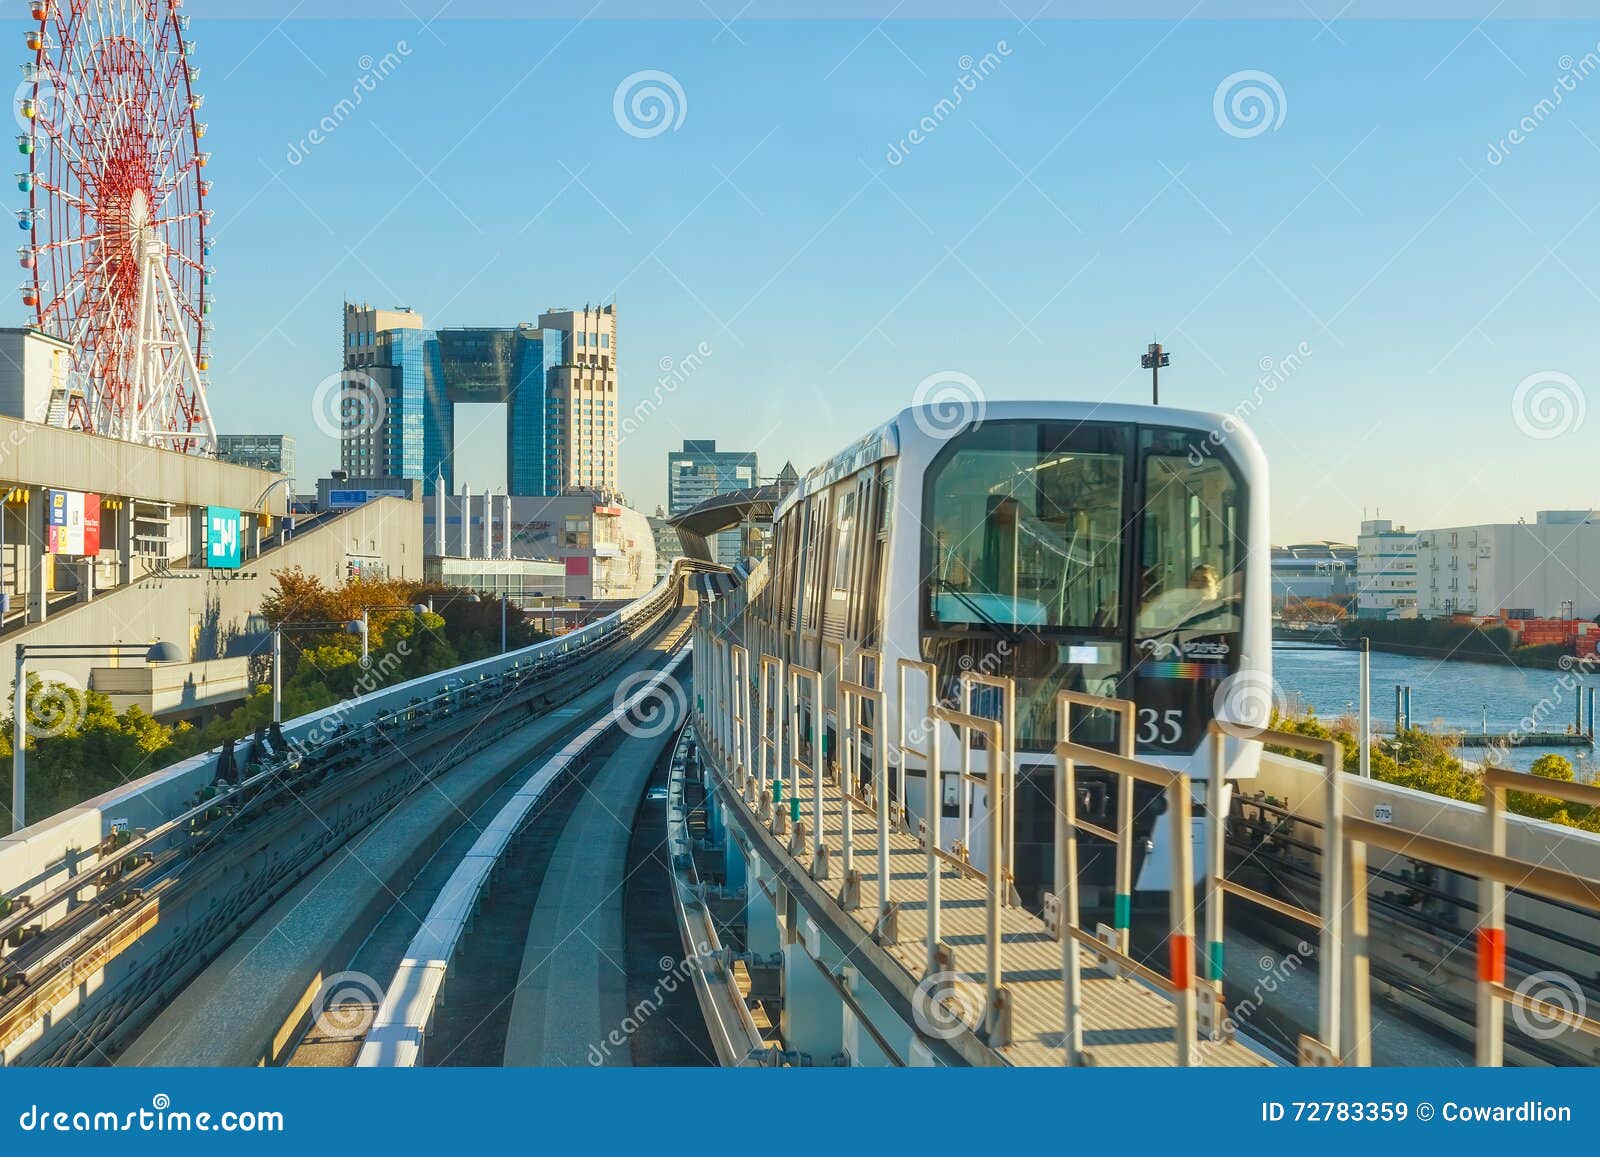 View From A Yurikamome Train In Odaiba Tokyo Japan Editorial Stock Image Image Of Speed Cityscape